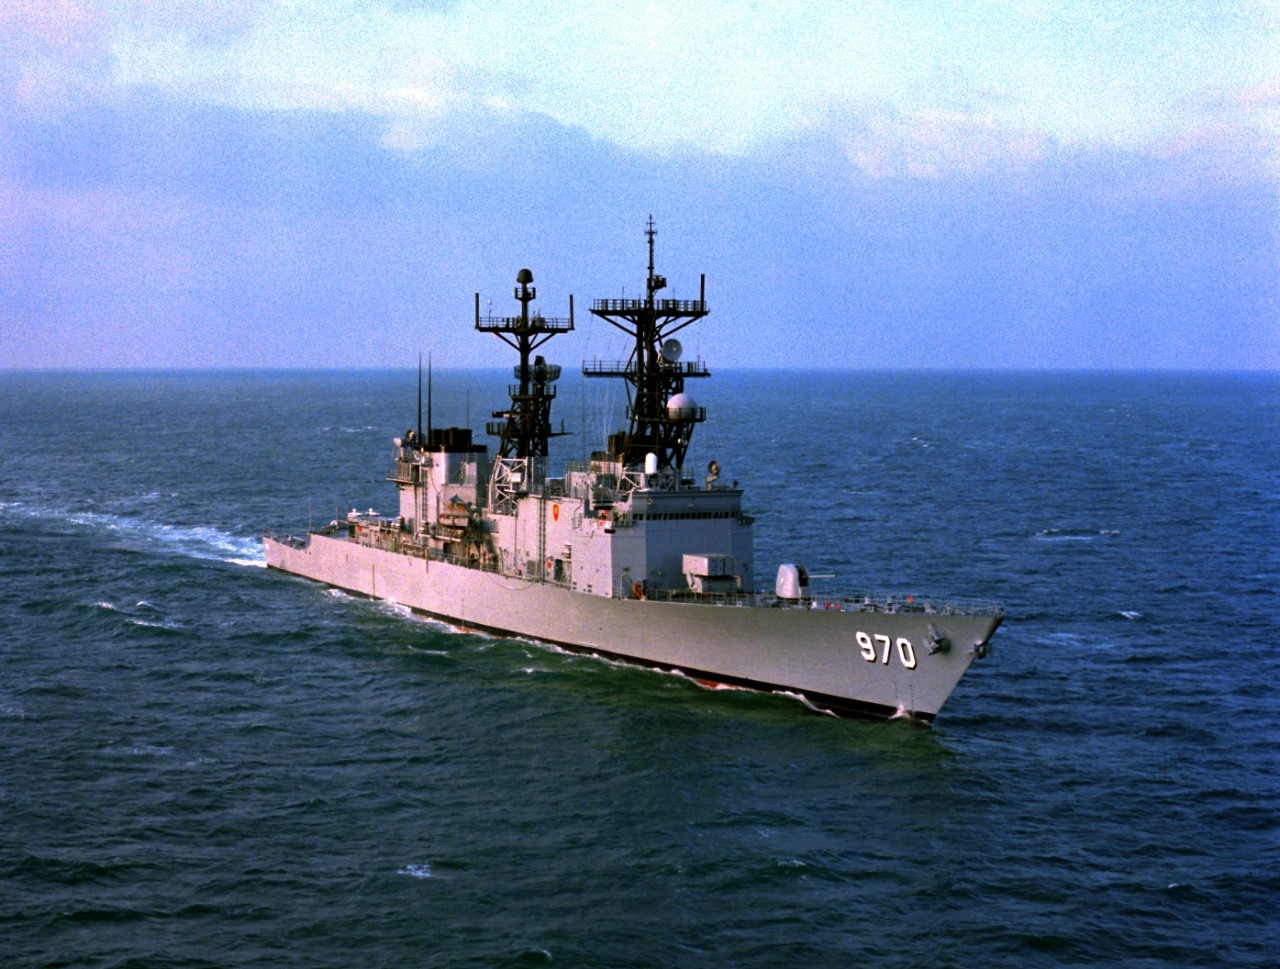 Caron underway in early 1983. (U.S. Navy Photograph DN-SC-83-06747, National Archives and Records Administration, Still Pictures Division, College Park, Md.)